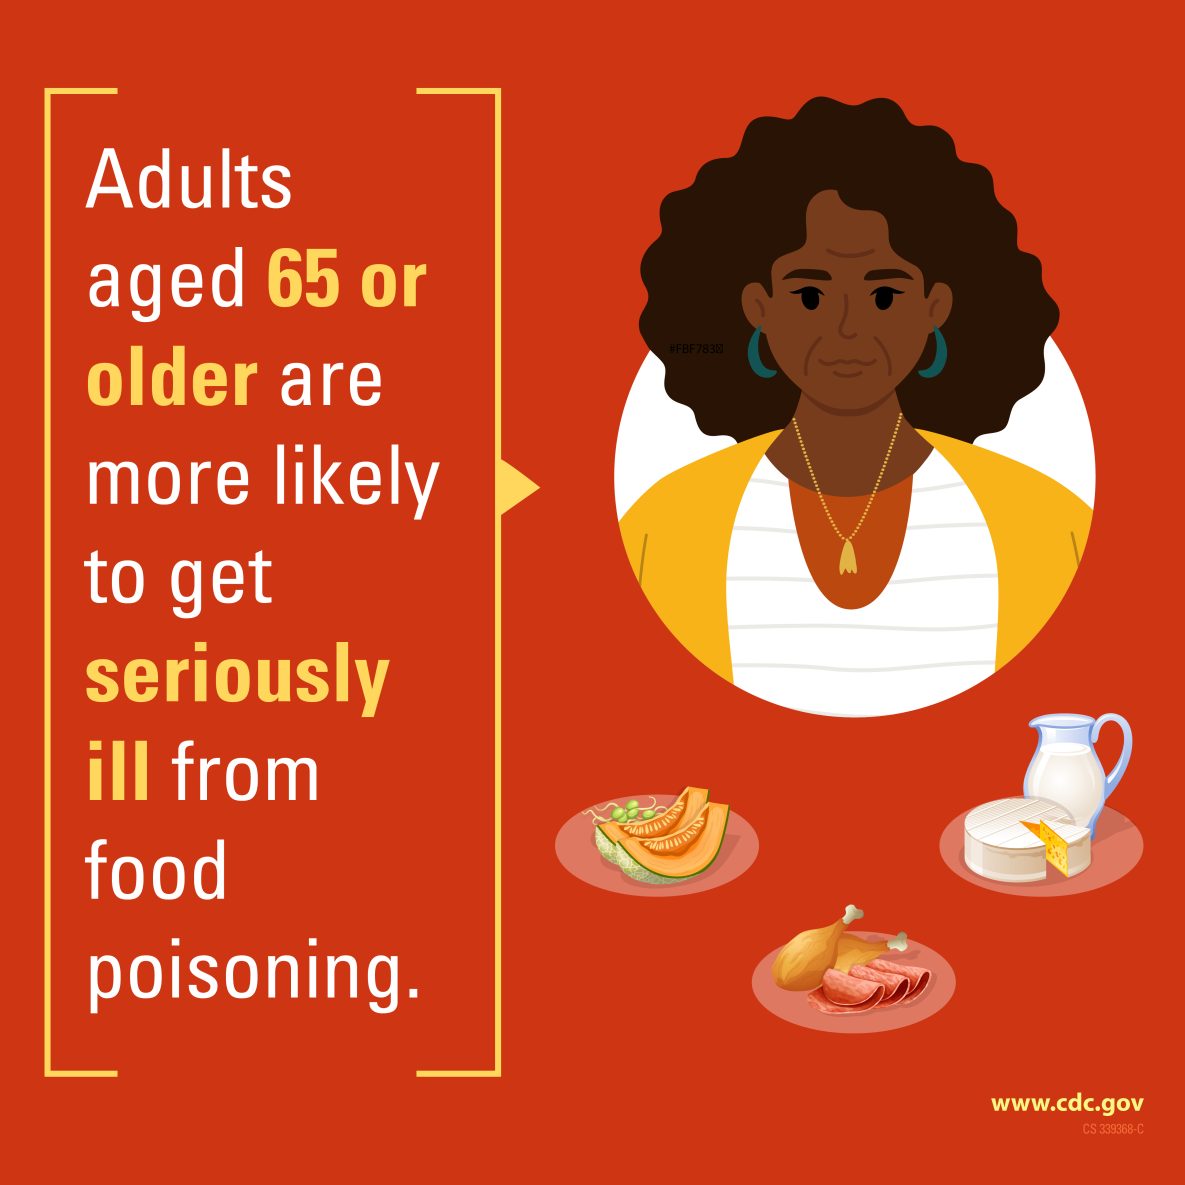 Adults aged 65 and older are more likely to get seriously ill from food poisoning.